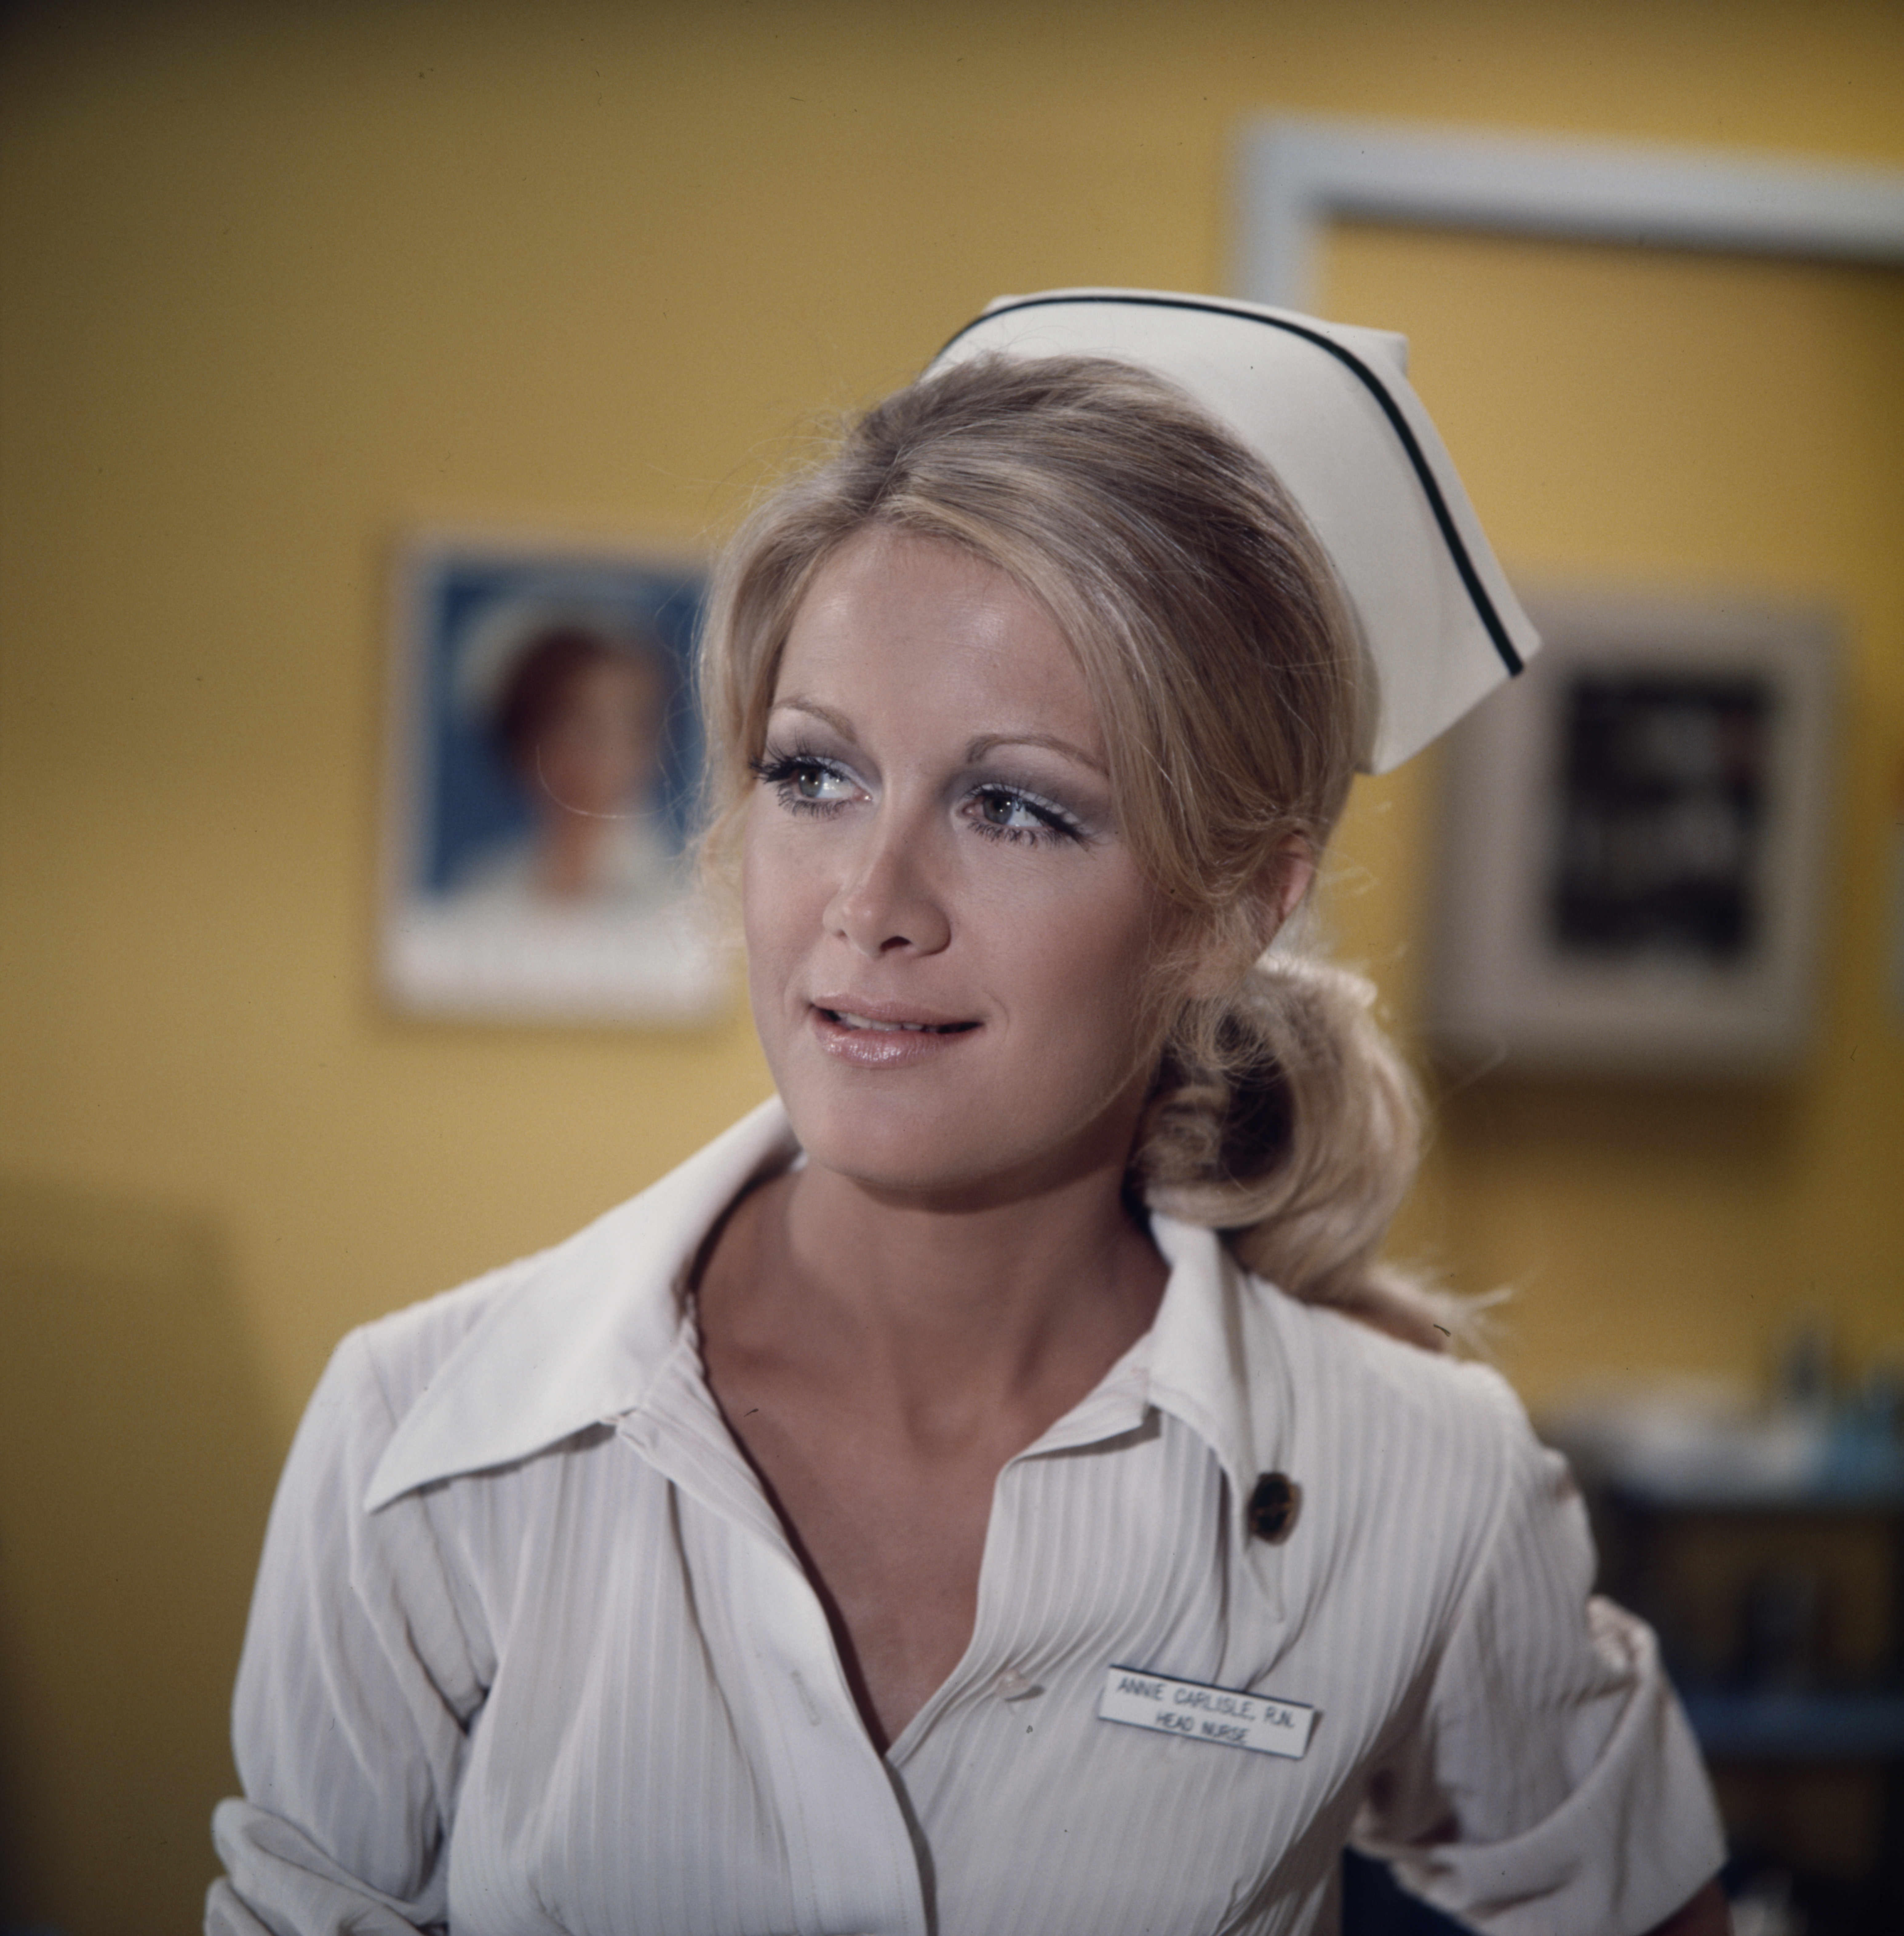 Joan Van Ark in "The New Temperatures Rising Show" in 1972. | Source: Getty Images